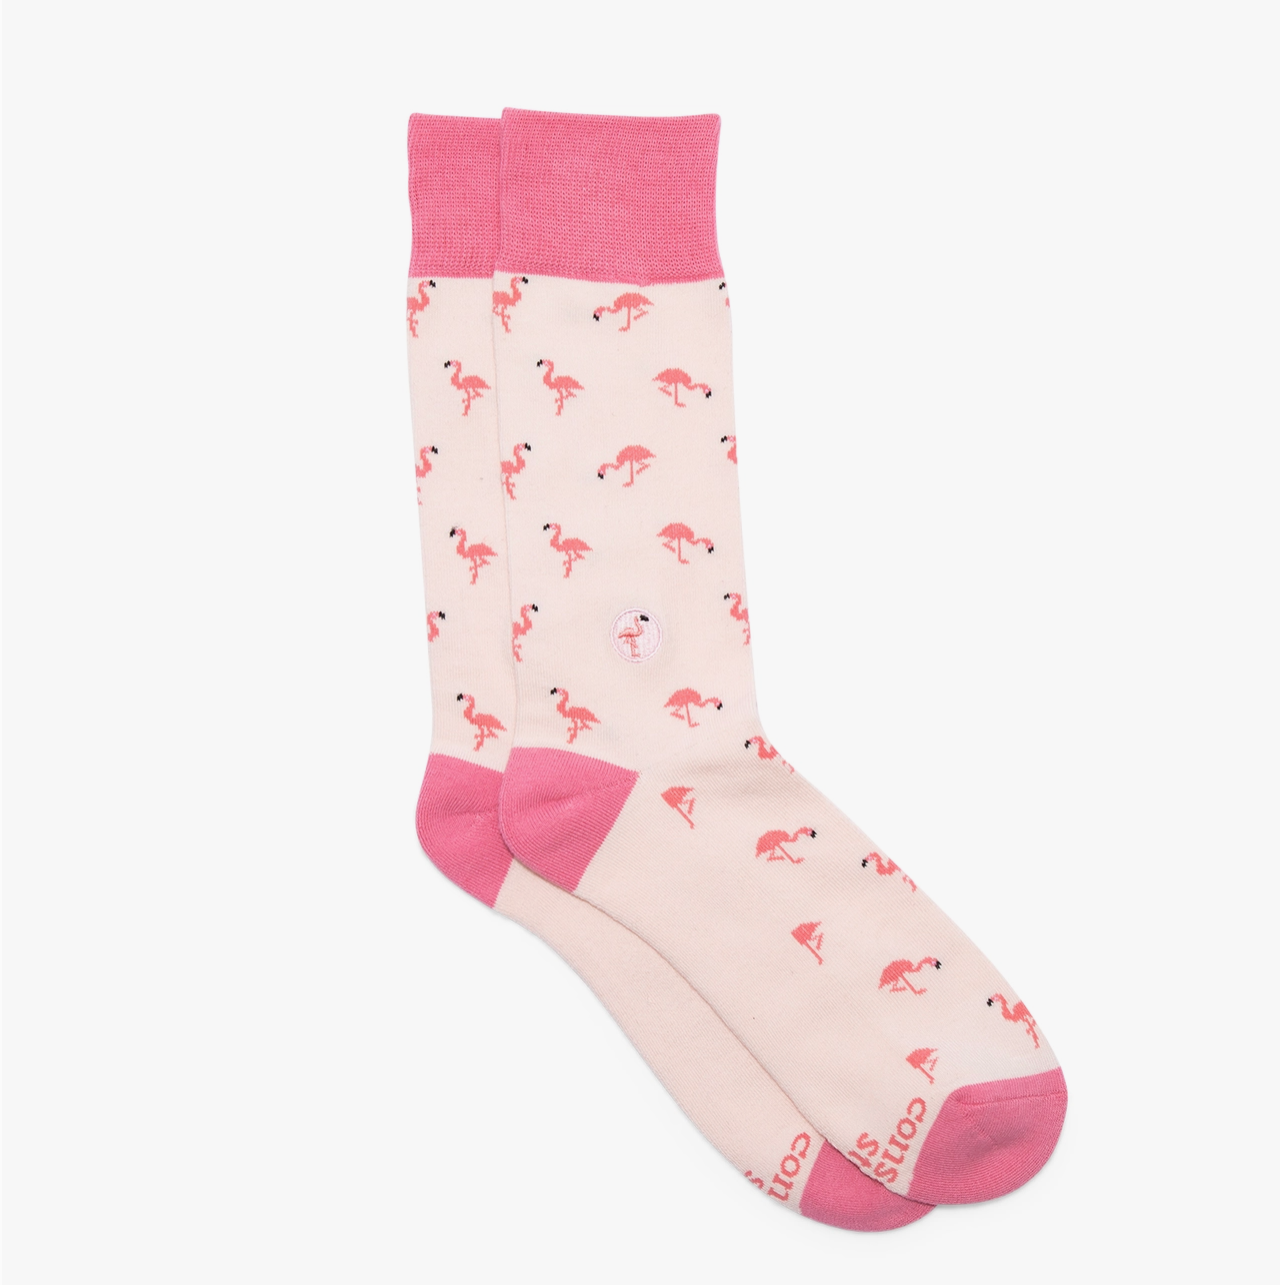 Conscious Step - Socks that Protect Flamingos  Conscious Step   -better made easy-eco-friendly-sustainable-gifting